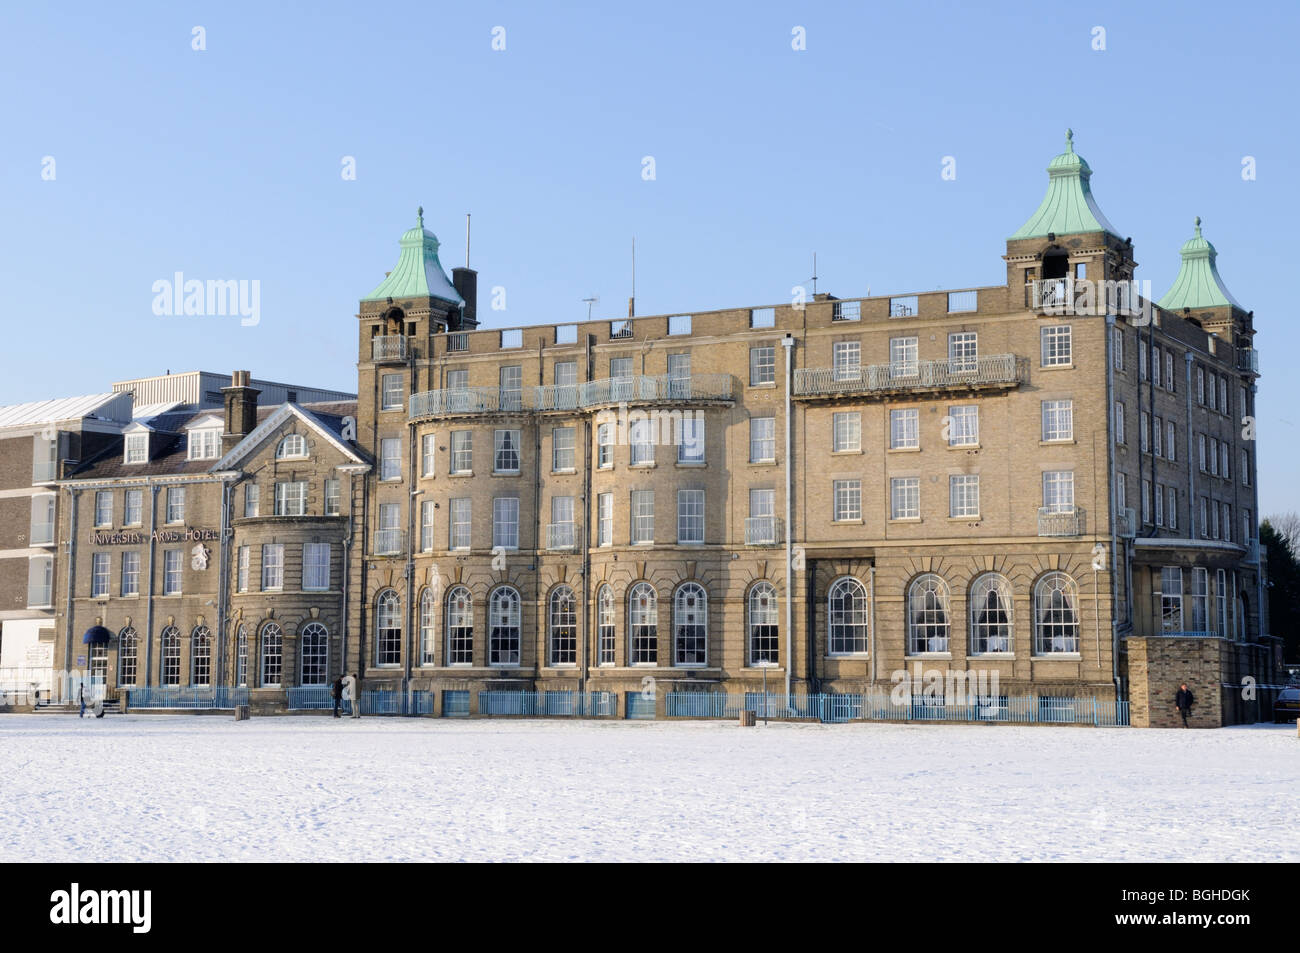 England; Cambridge; The University Arms Hotel on Parkers Piece in winter Stock Photo